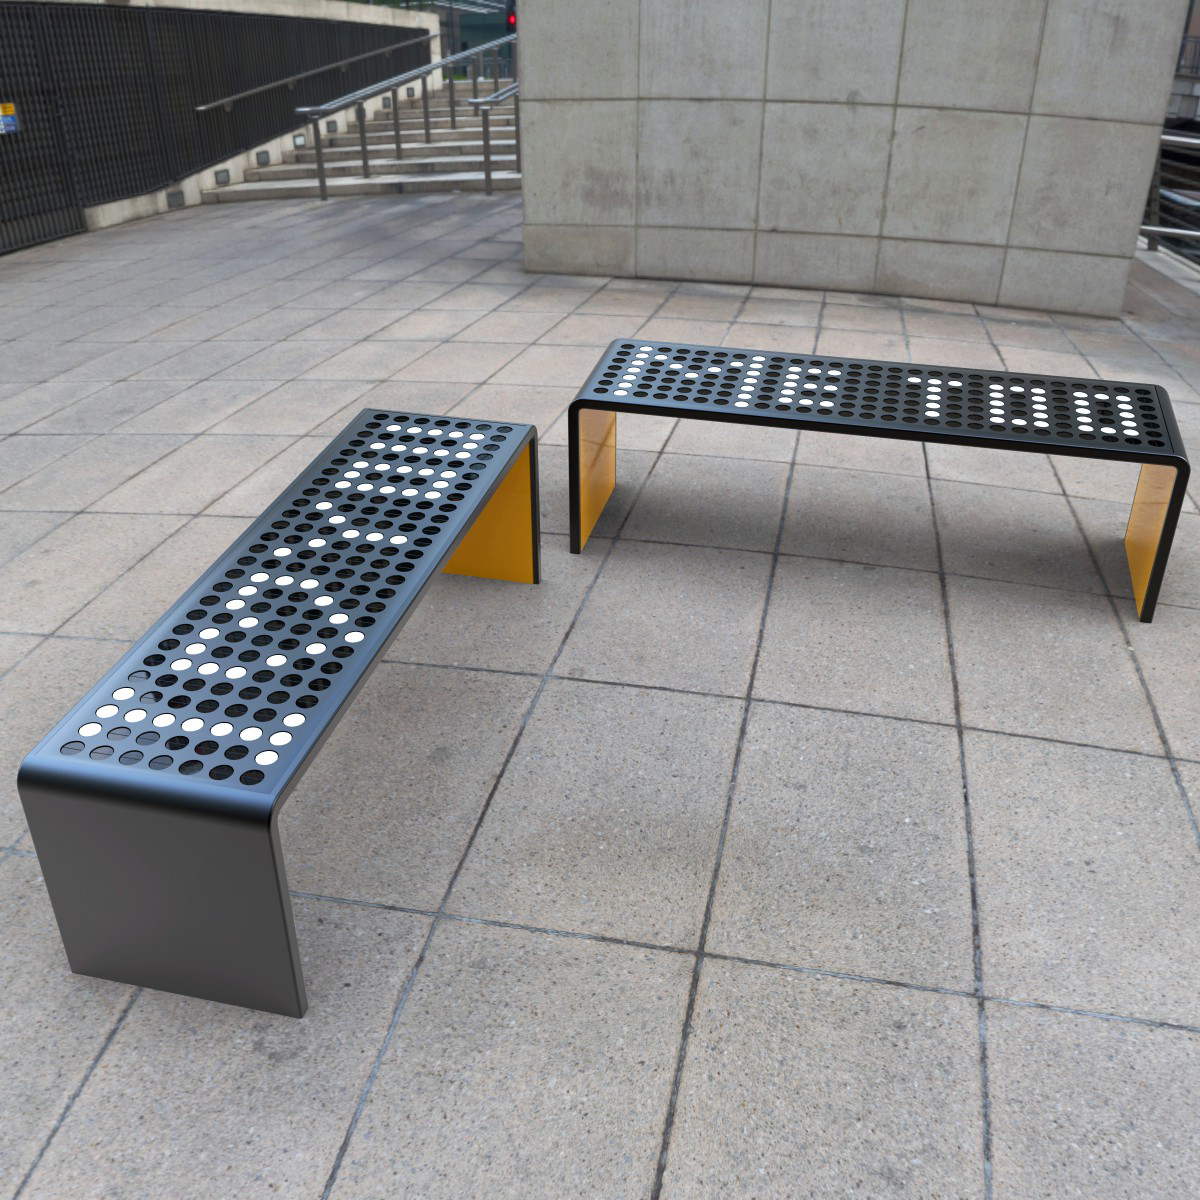 "Note" Bench: Redefining Public Seating with Interactive and Expressive Features